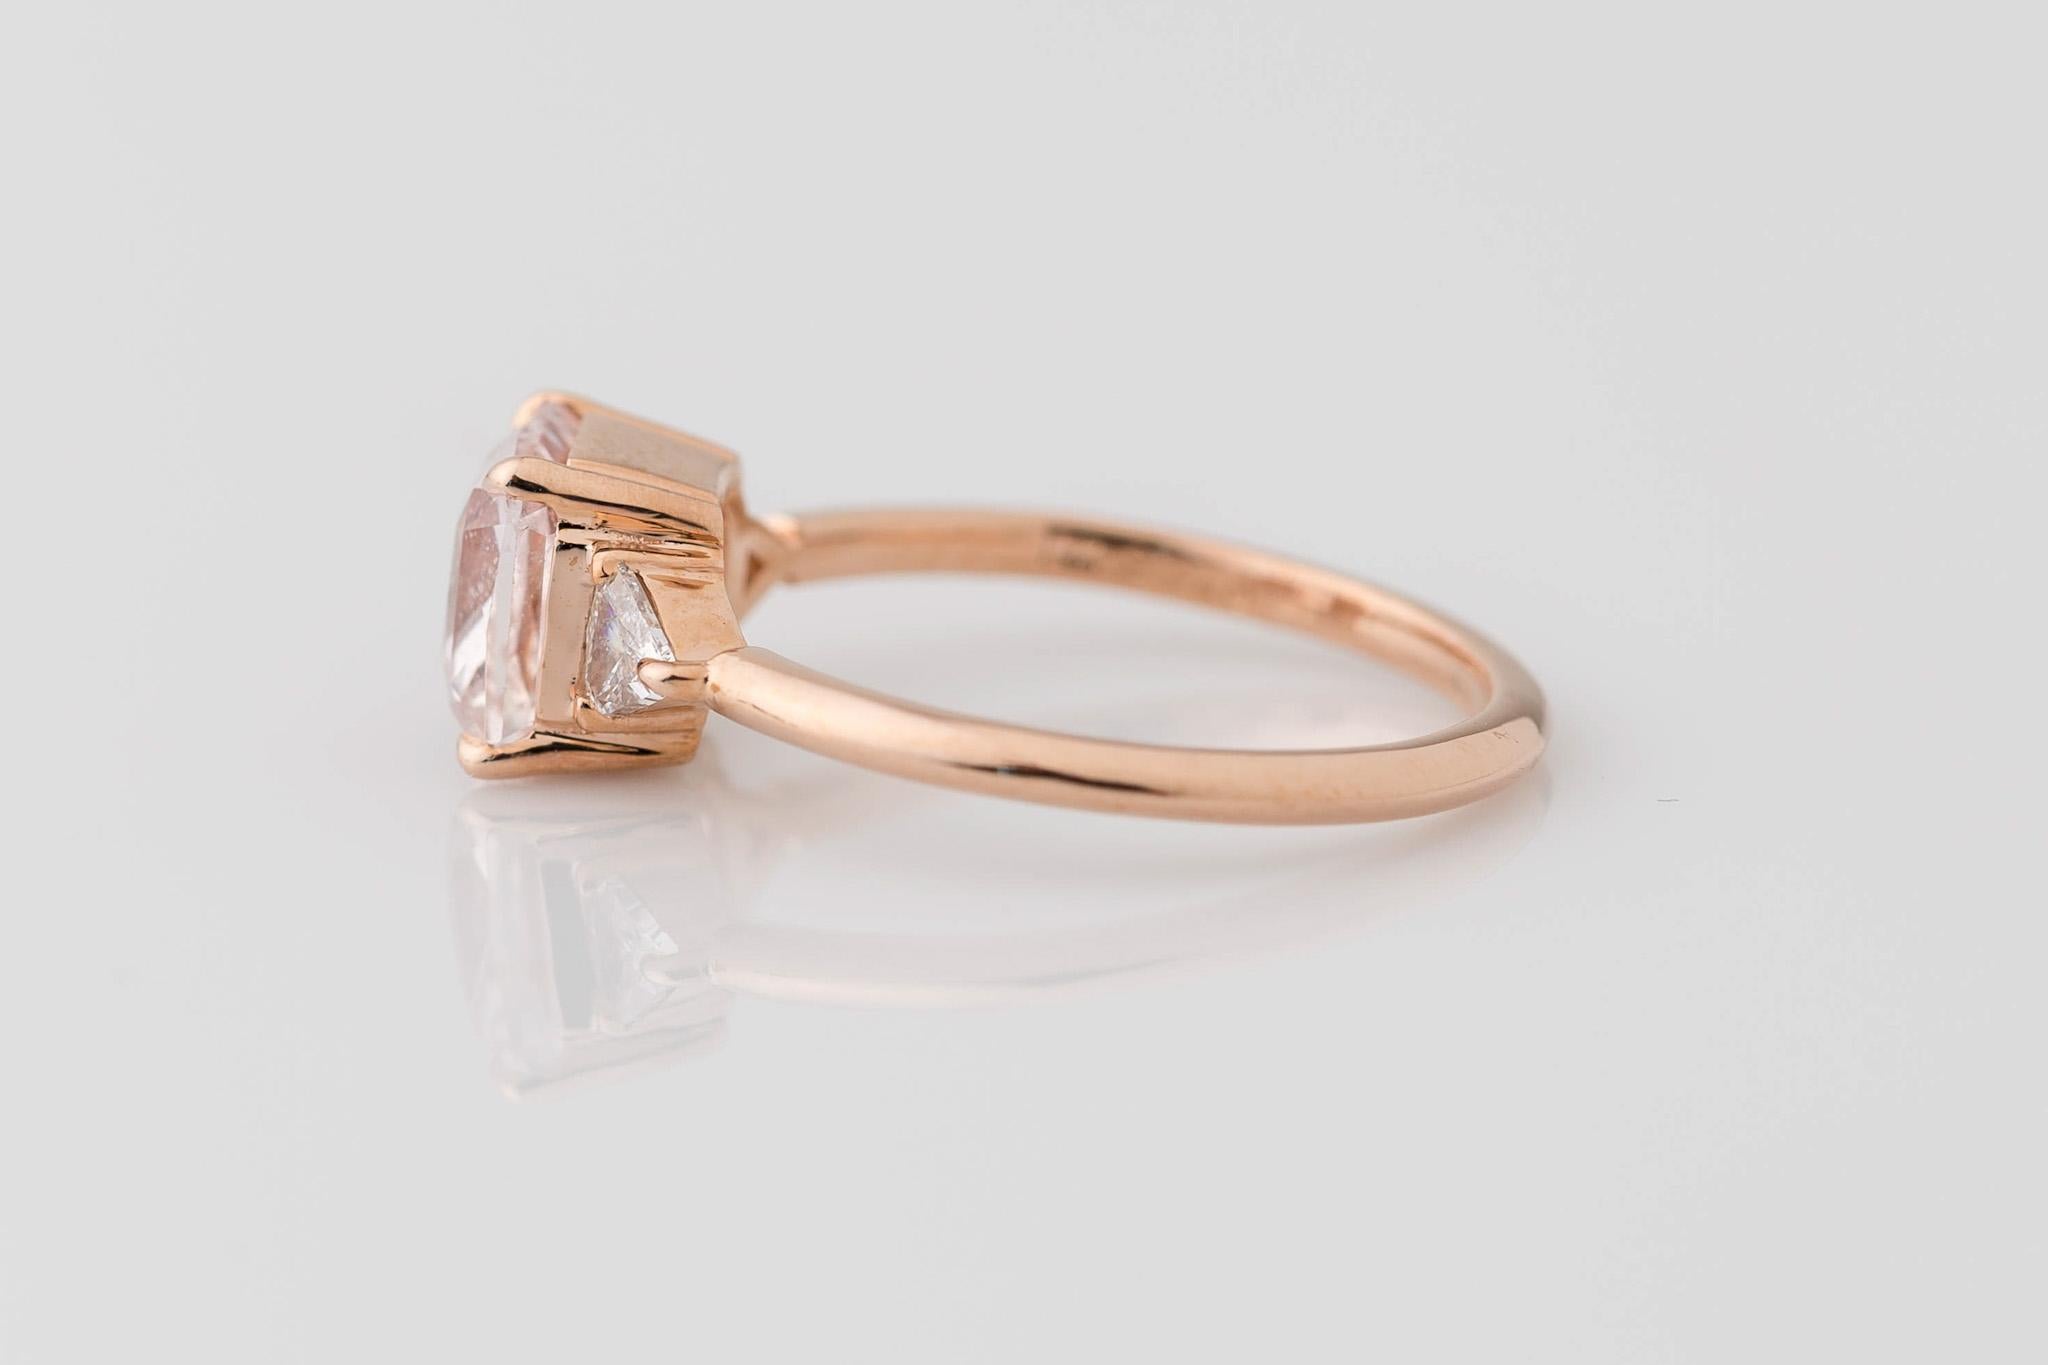 Step into elegance with our GIA Certified 1.98 Ct. Radiant Cut Pink Sapphire Ring. At its heart lies a radiant-cut natural no-heat sapphire, 1.98 carats, transparently pale pink, measuring 6.97x6.78x4.15mm. Framing the center stone are two